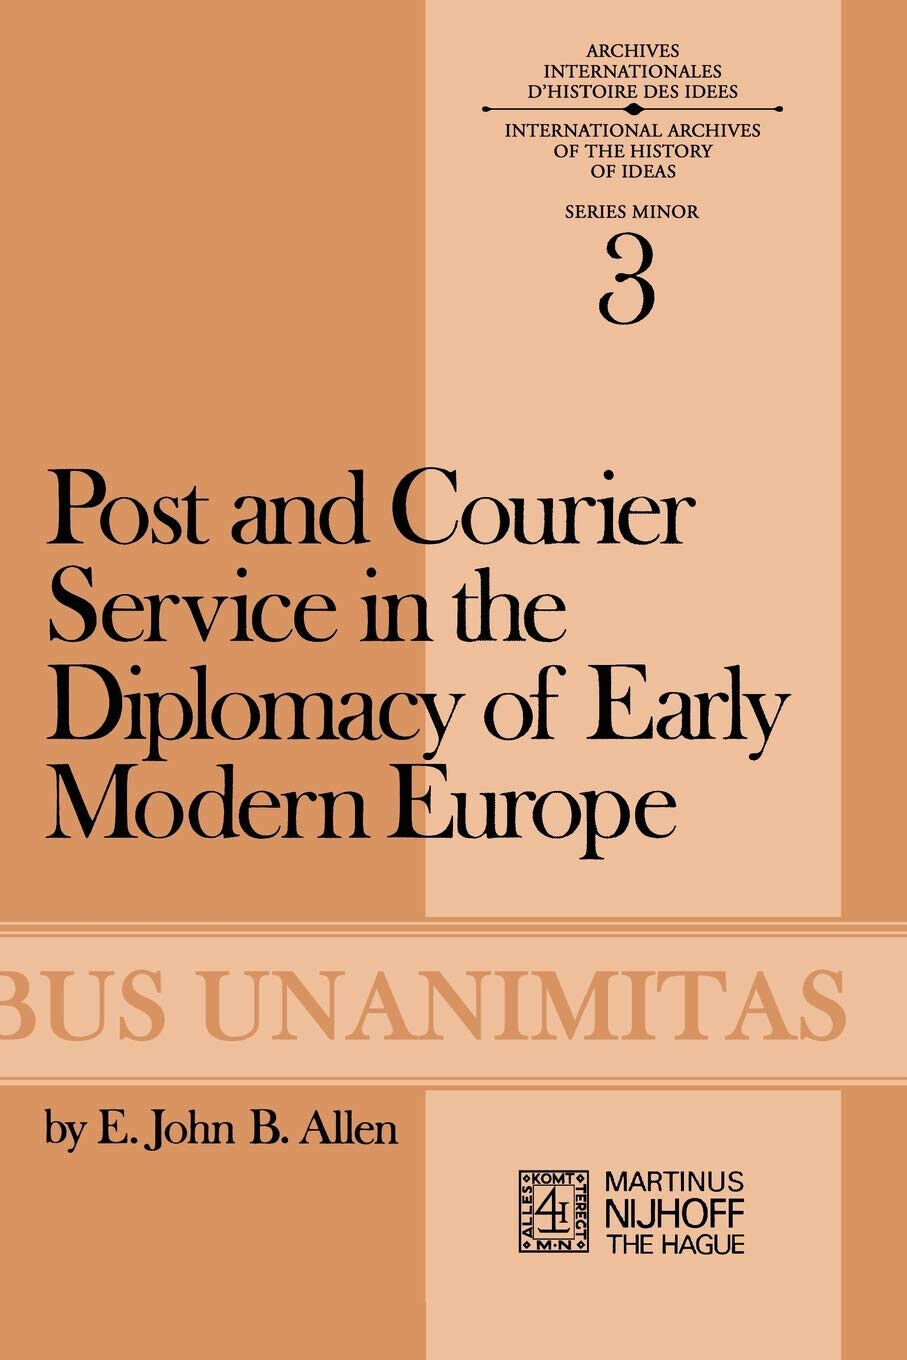 Post and Courier Service in the Diplomacy of Early Modern Europe - Springer,1972